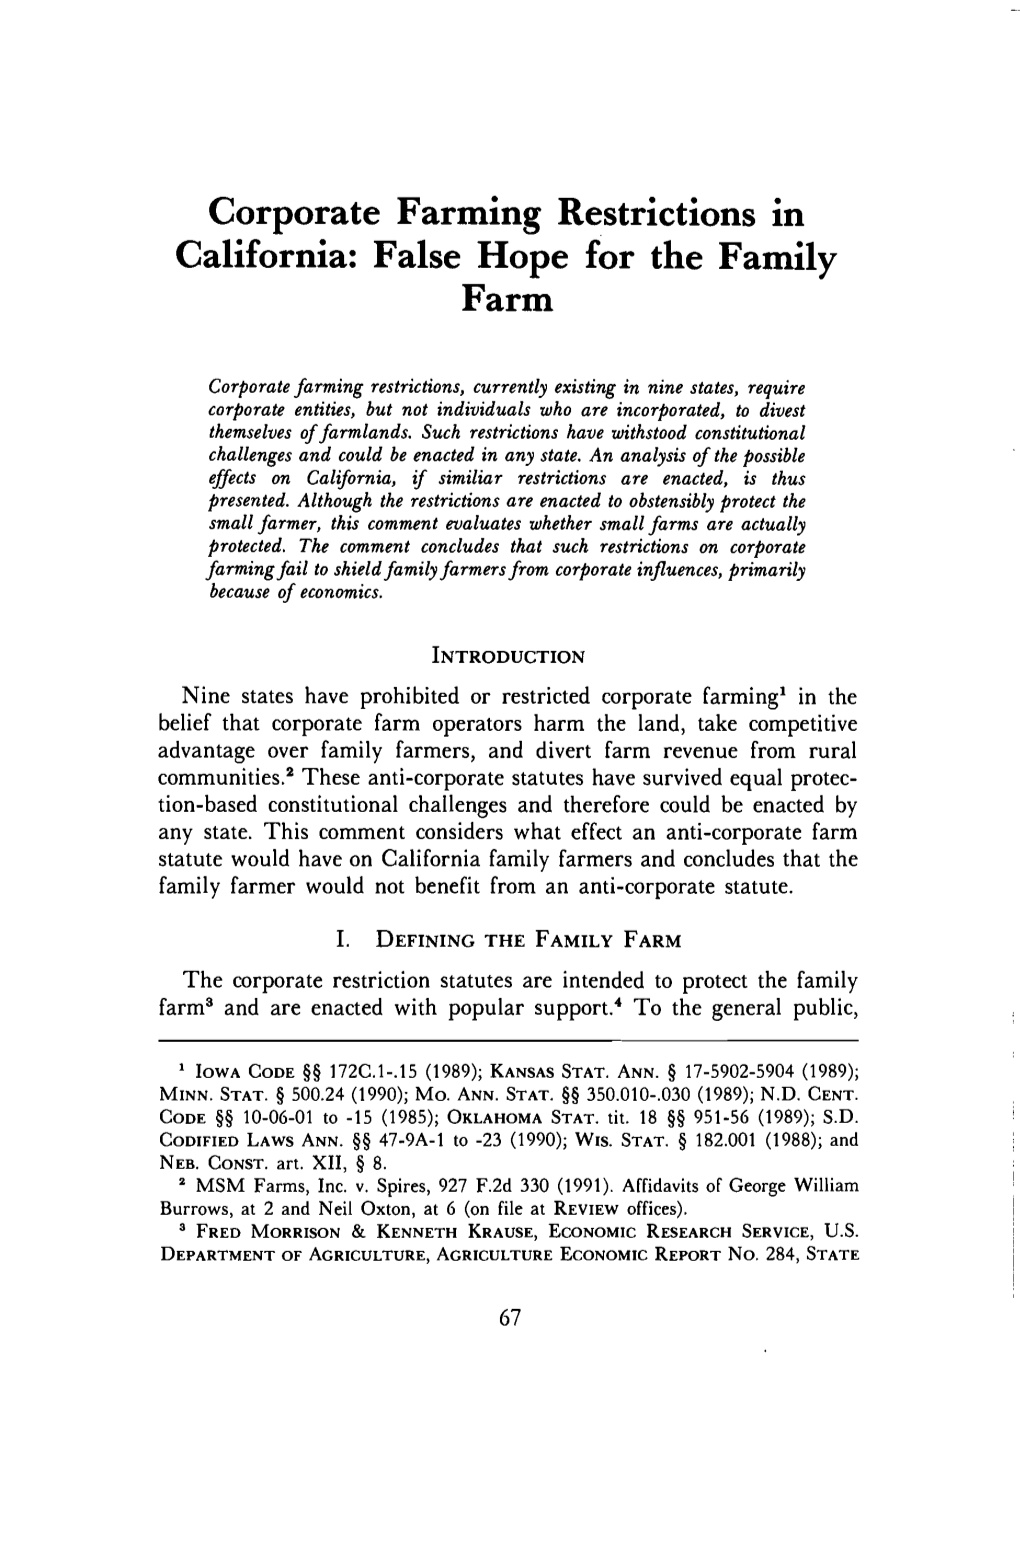 Corporate Farming Restrictions in California: False Hope for the Family Farm